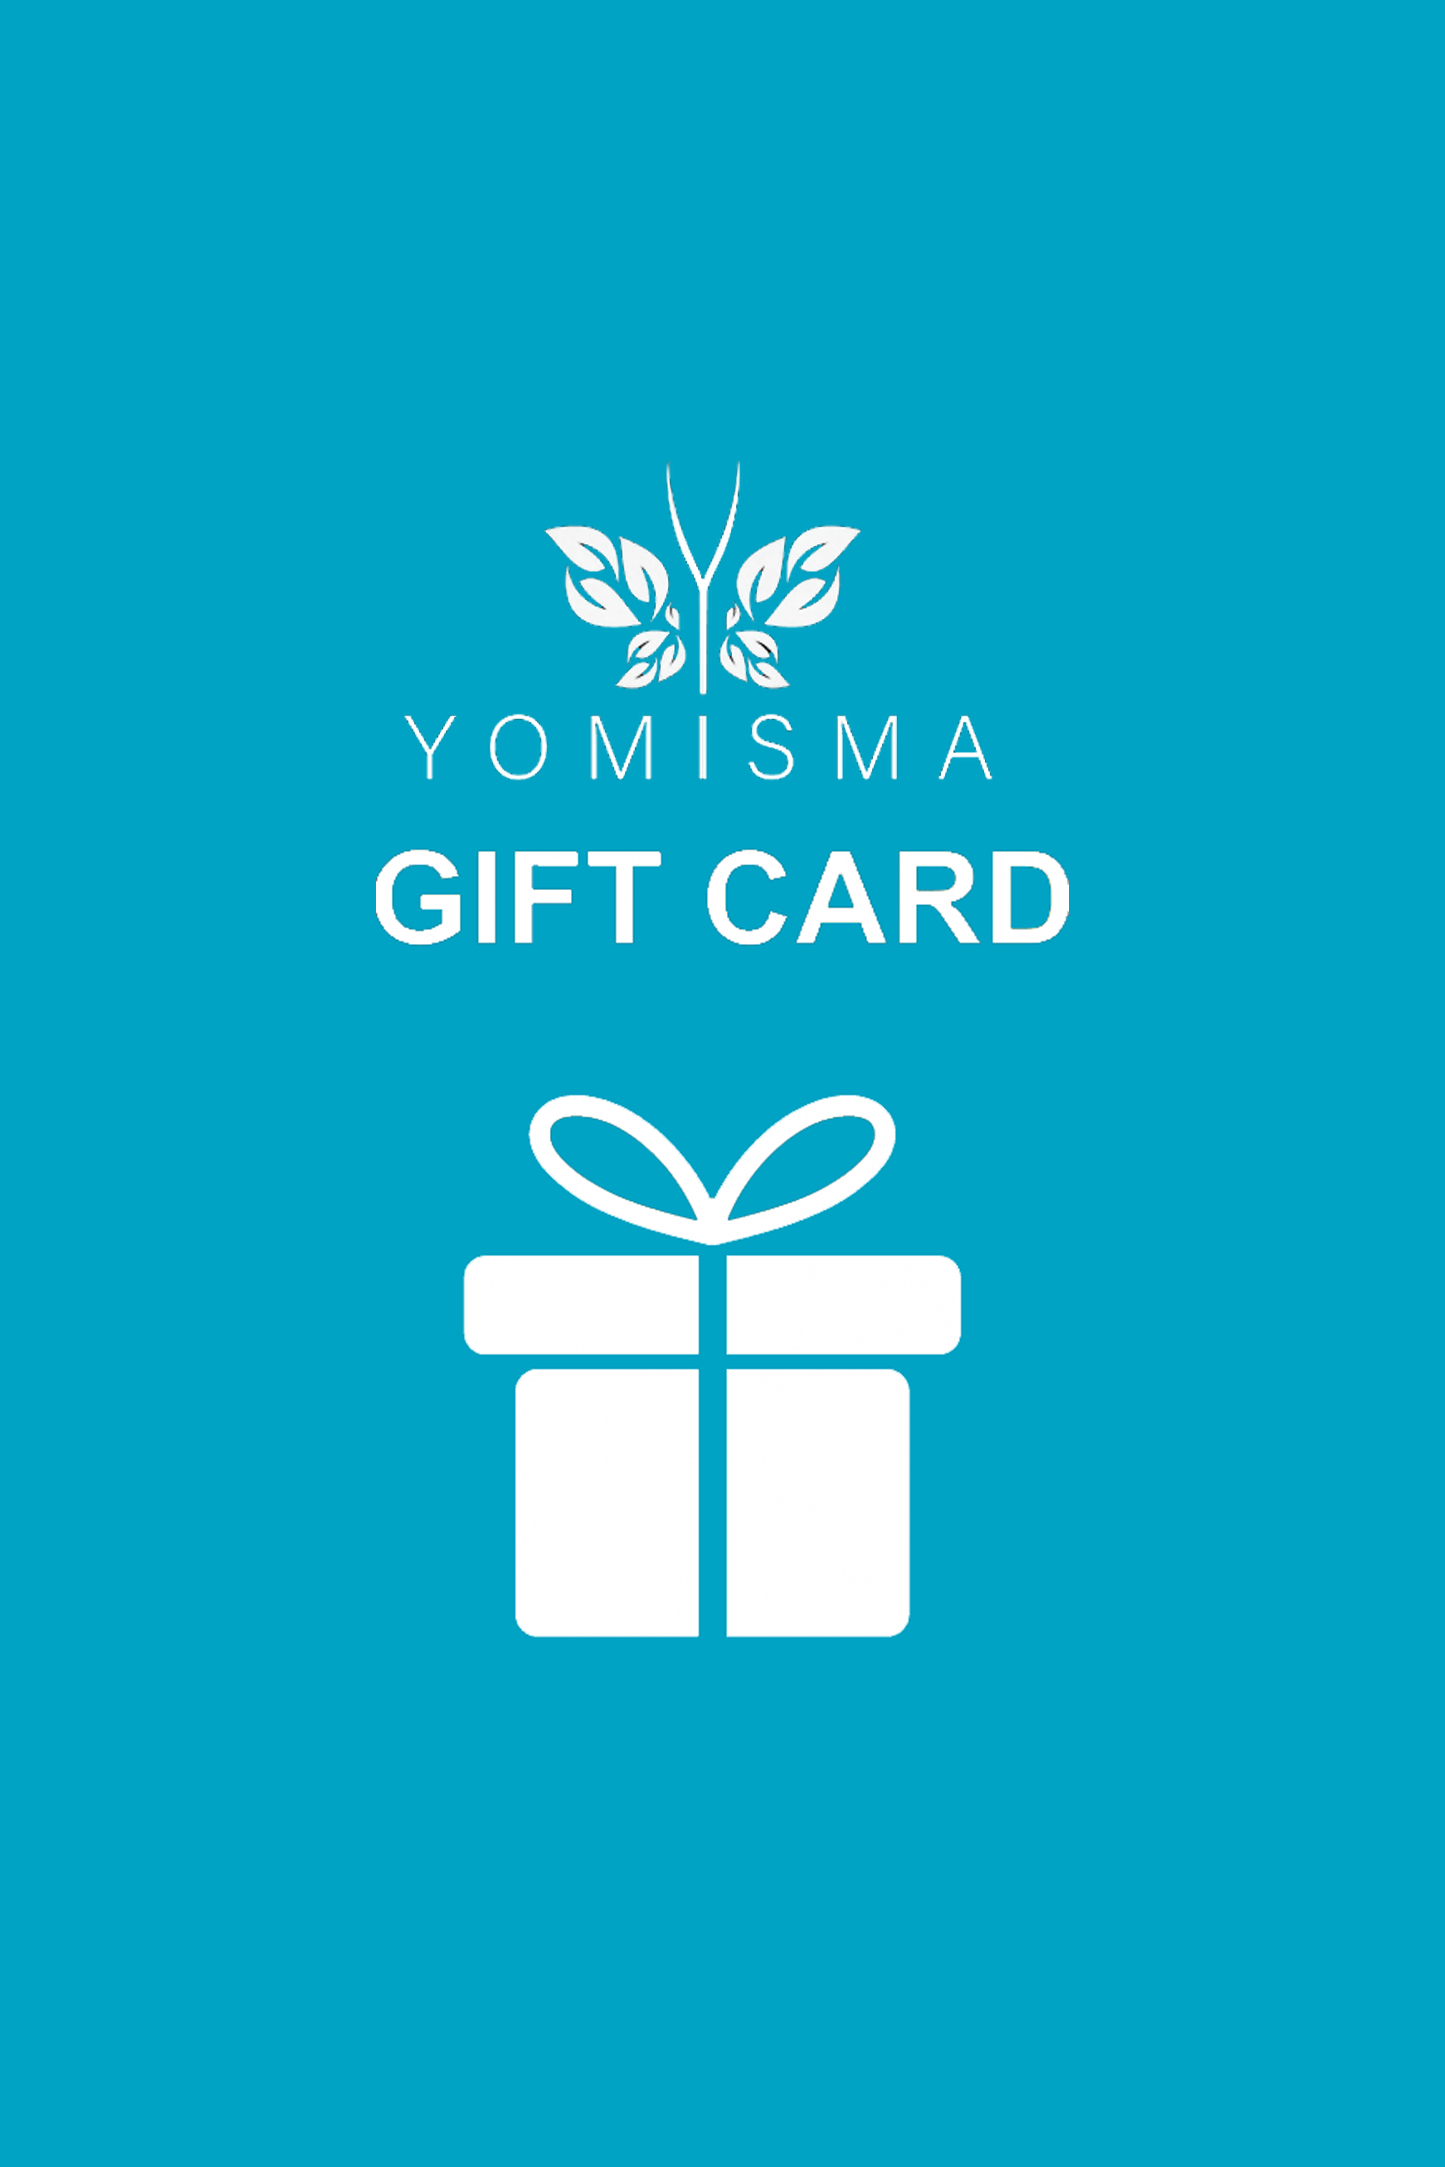 A present or gift with the word gift card above it